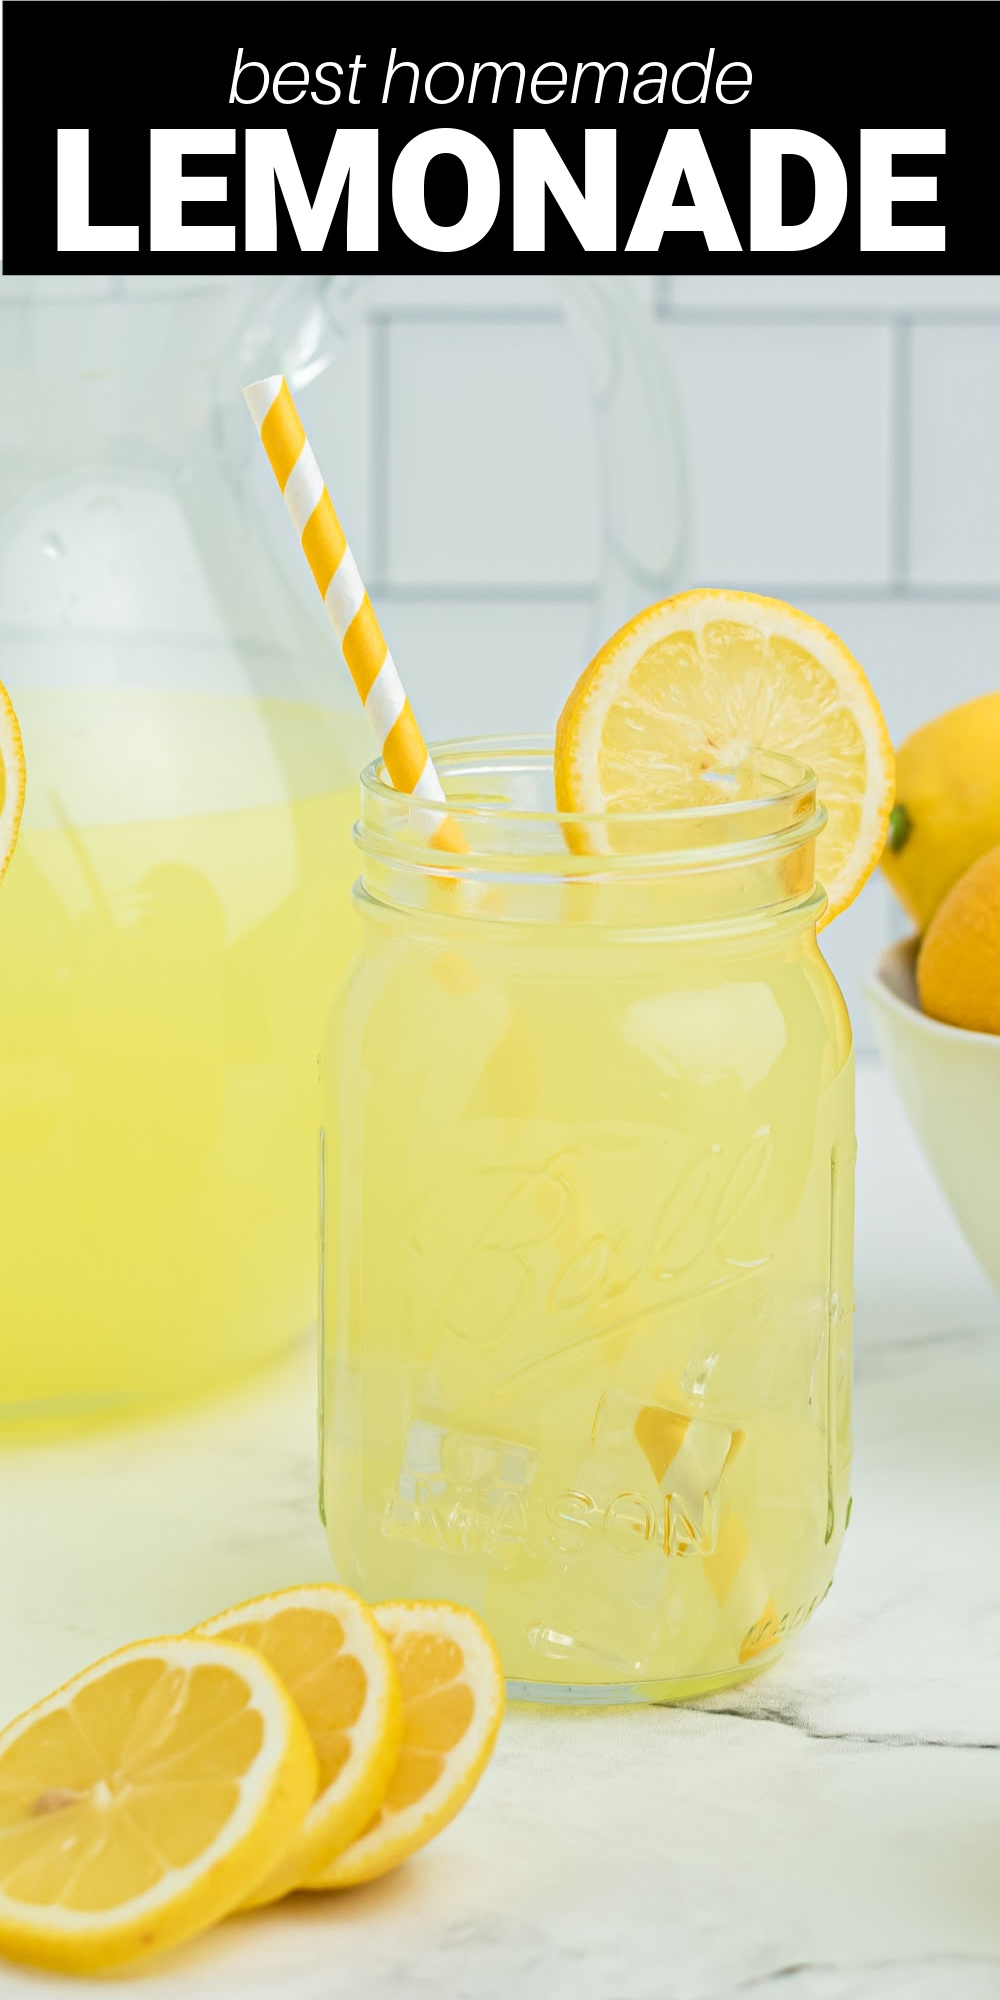 Nothings says summer better than the Best Lemonade Recipe you’ve ever tried. Made with freshly squeezed lemons and sweetened with a super easy simple syrup, this sweet and tangy lemonade will be a guaranteed hit all summer long!